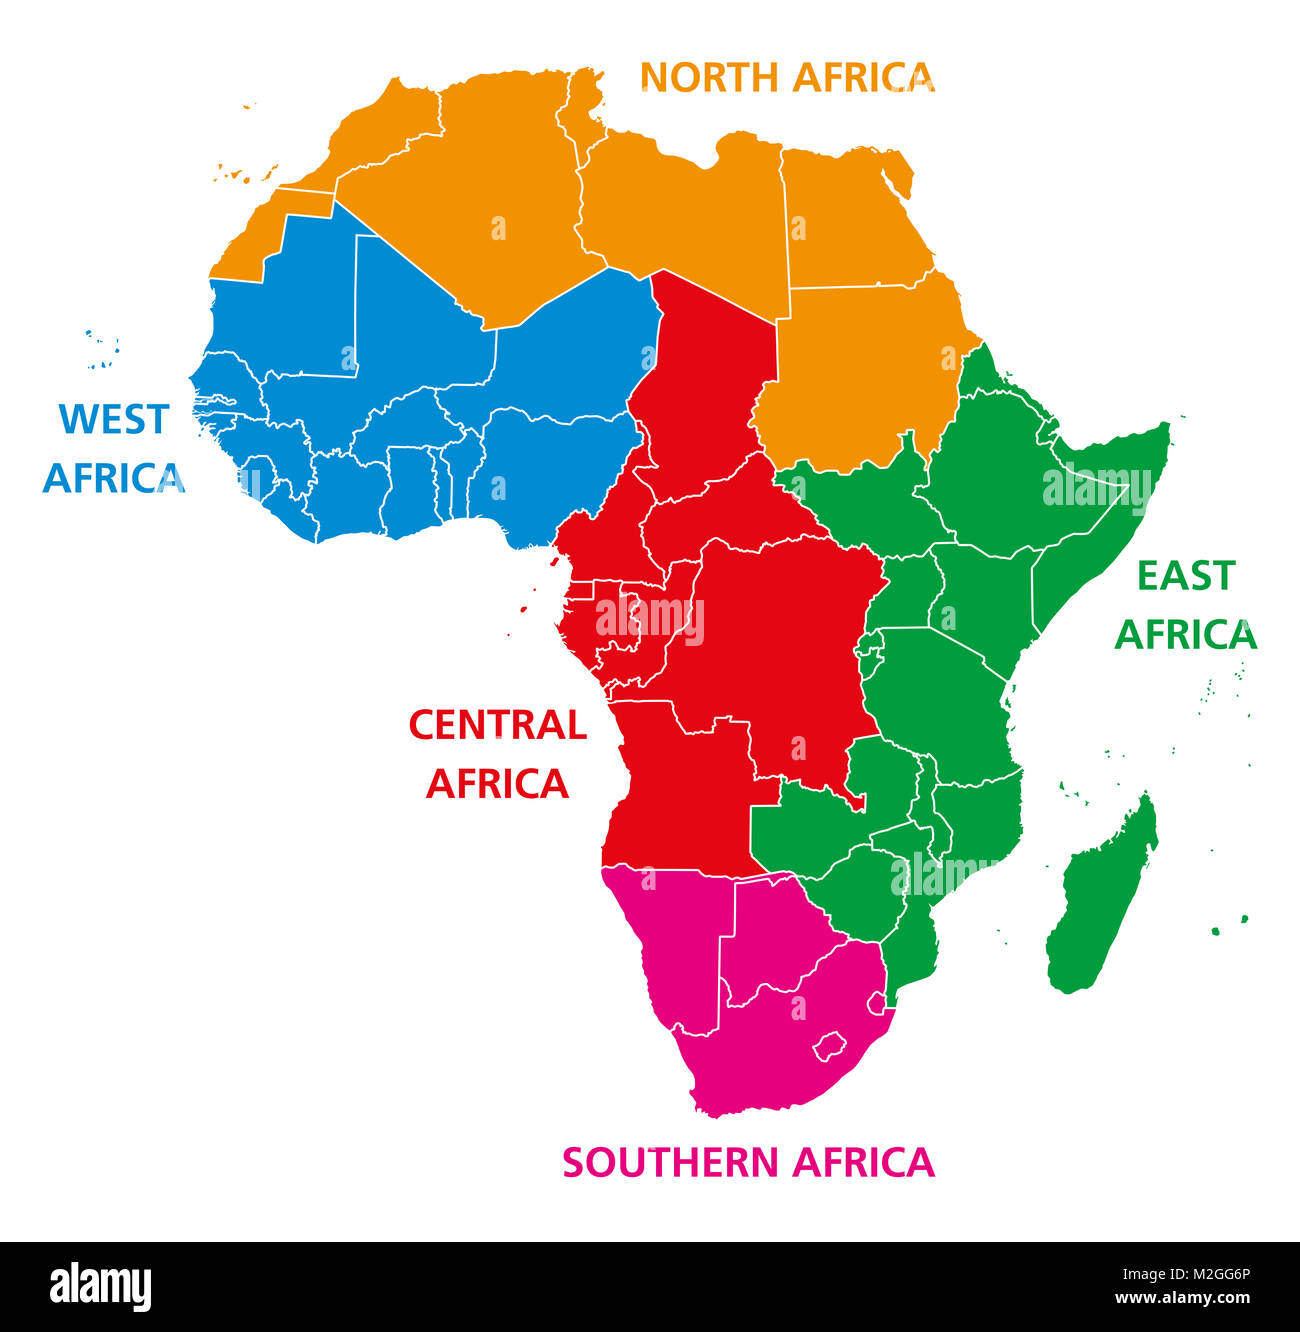 Regions of Africa. Political map. United Nations geoscheme with single countries. North, West, Central, East and Southern Africa in different colors. Stock Photo